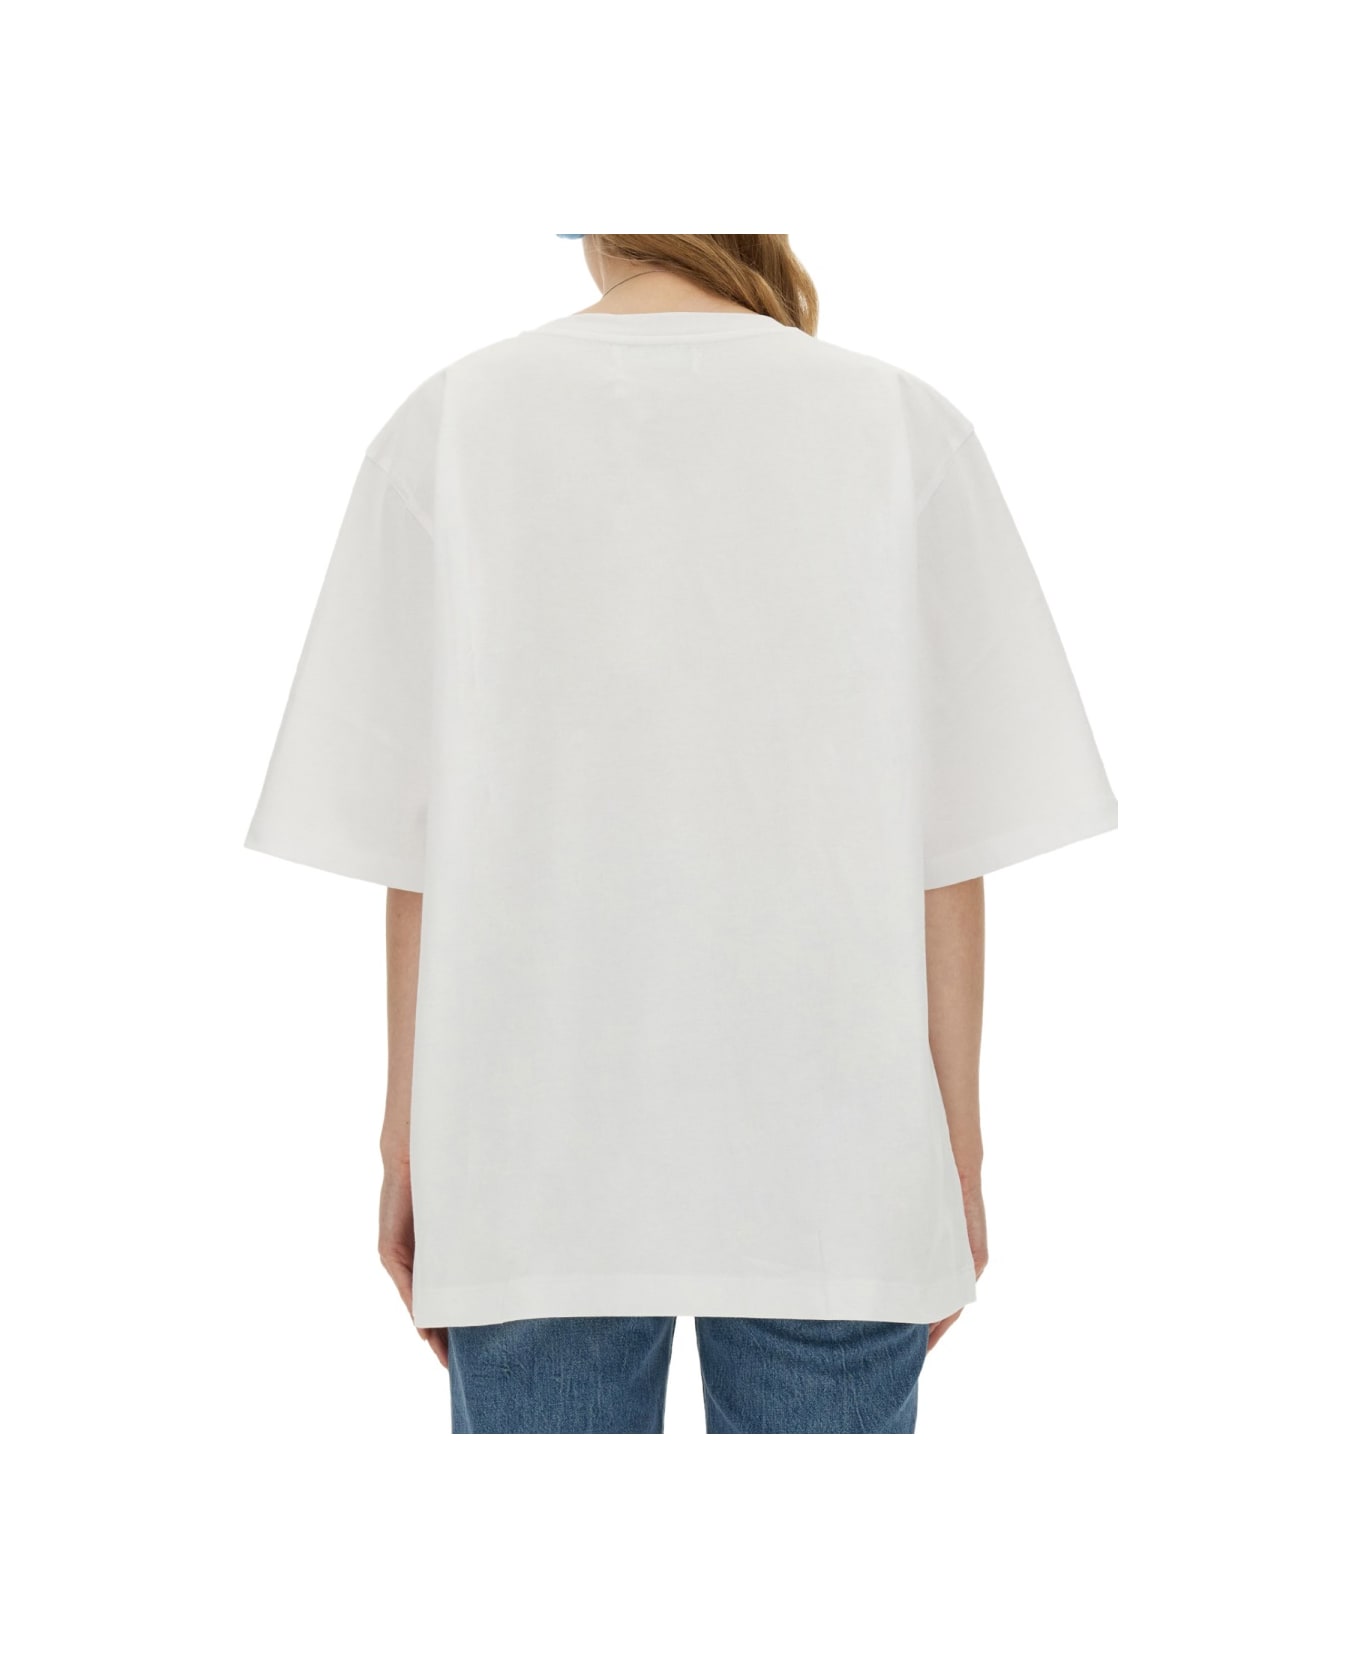 Fiorucci Candy Patch T-shirt - WHITE Tシャツ